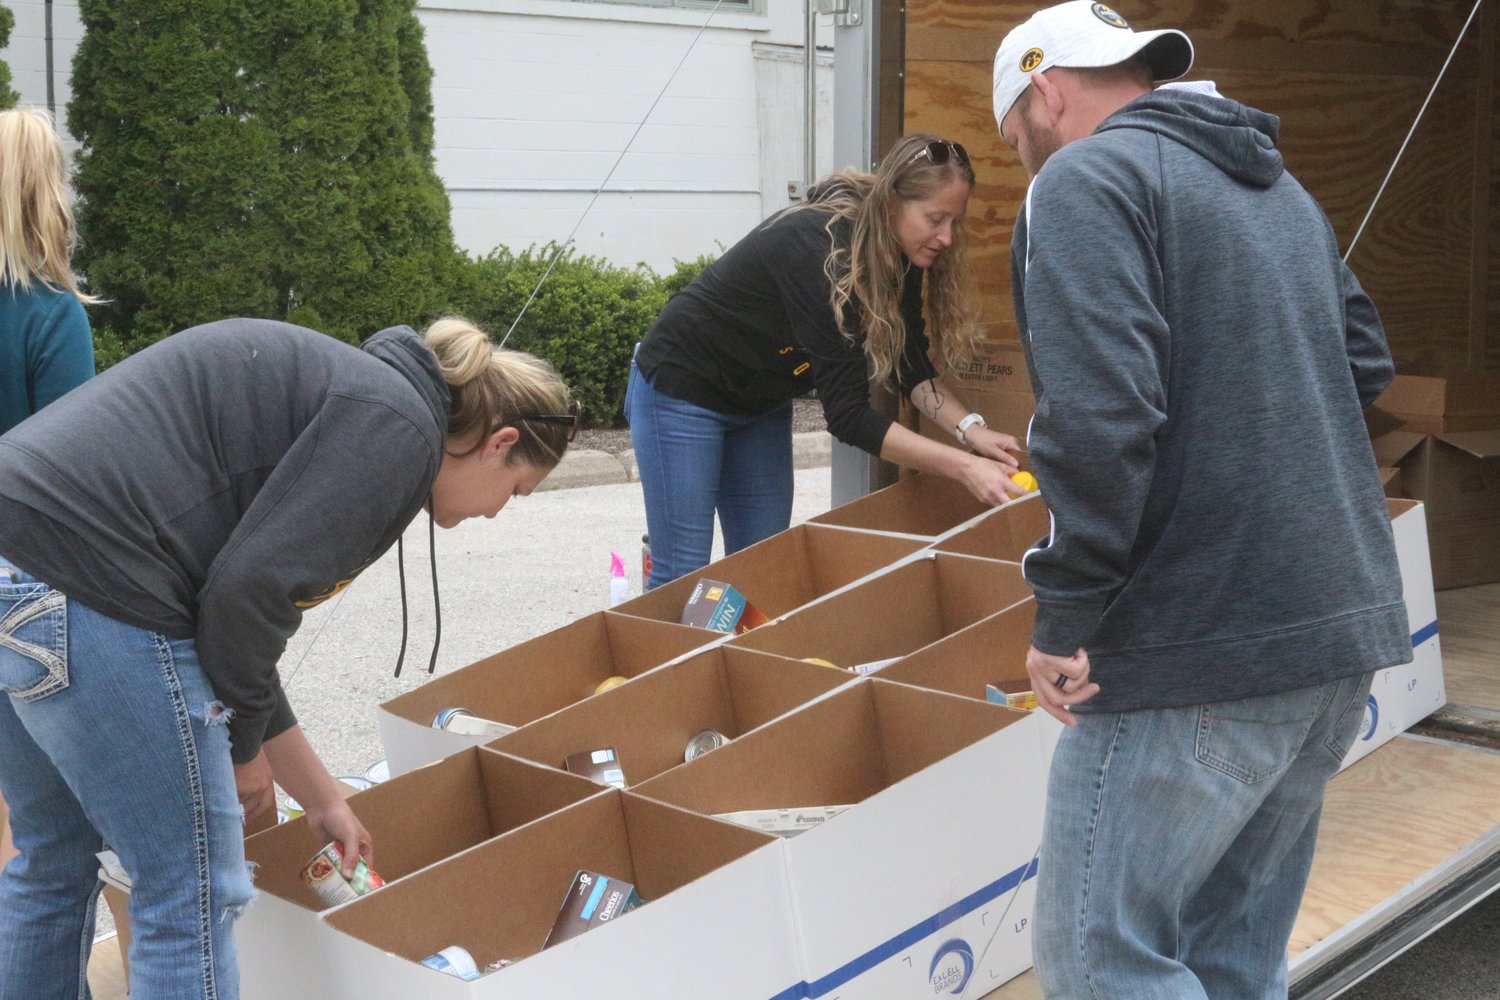 Wellman City Administrator Kelly Litwiller (left), City Clerk Beth VanWinkle (center) and City Council Member Shannon McCain place food in boxes.